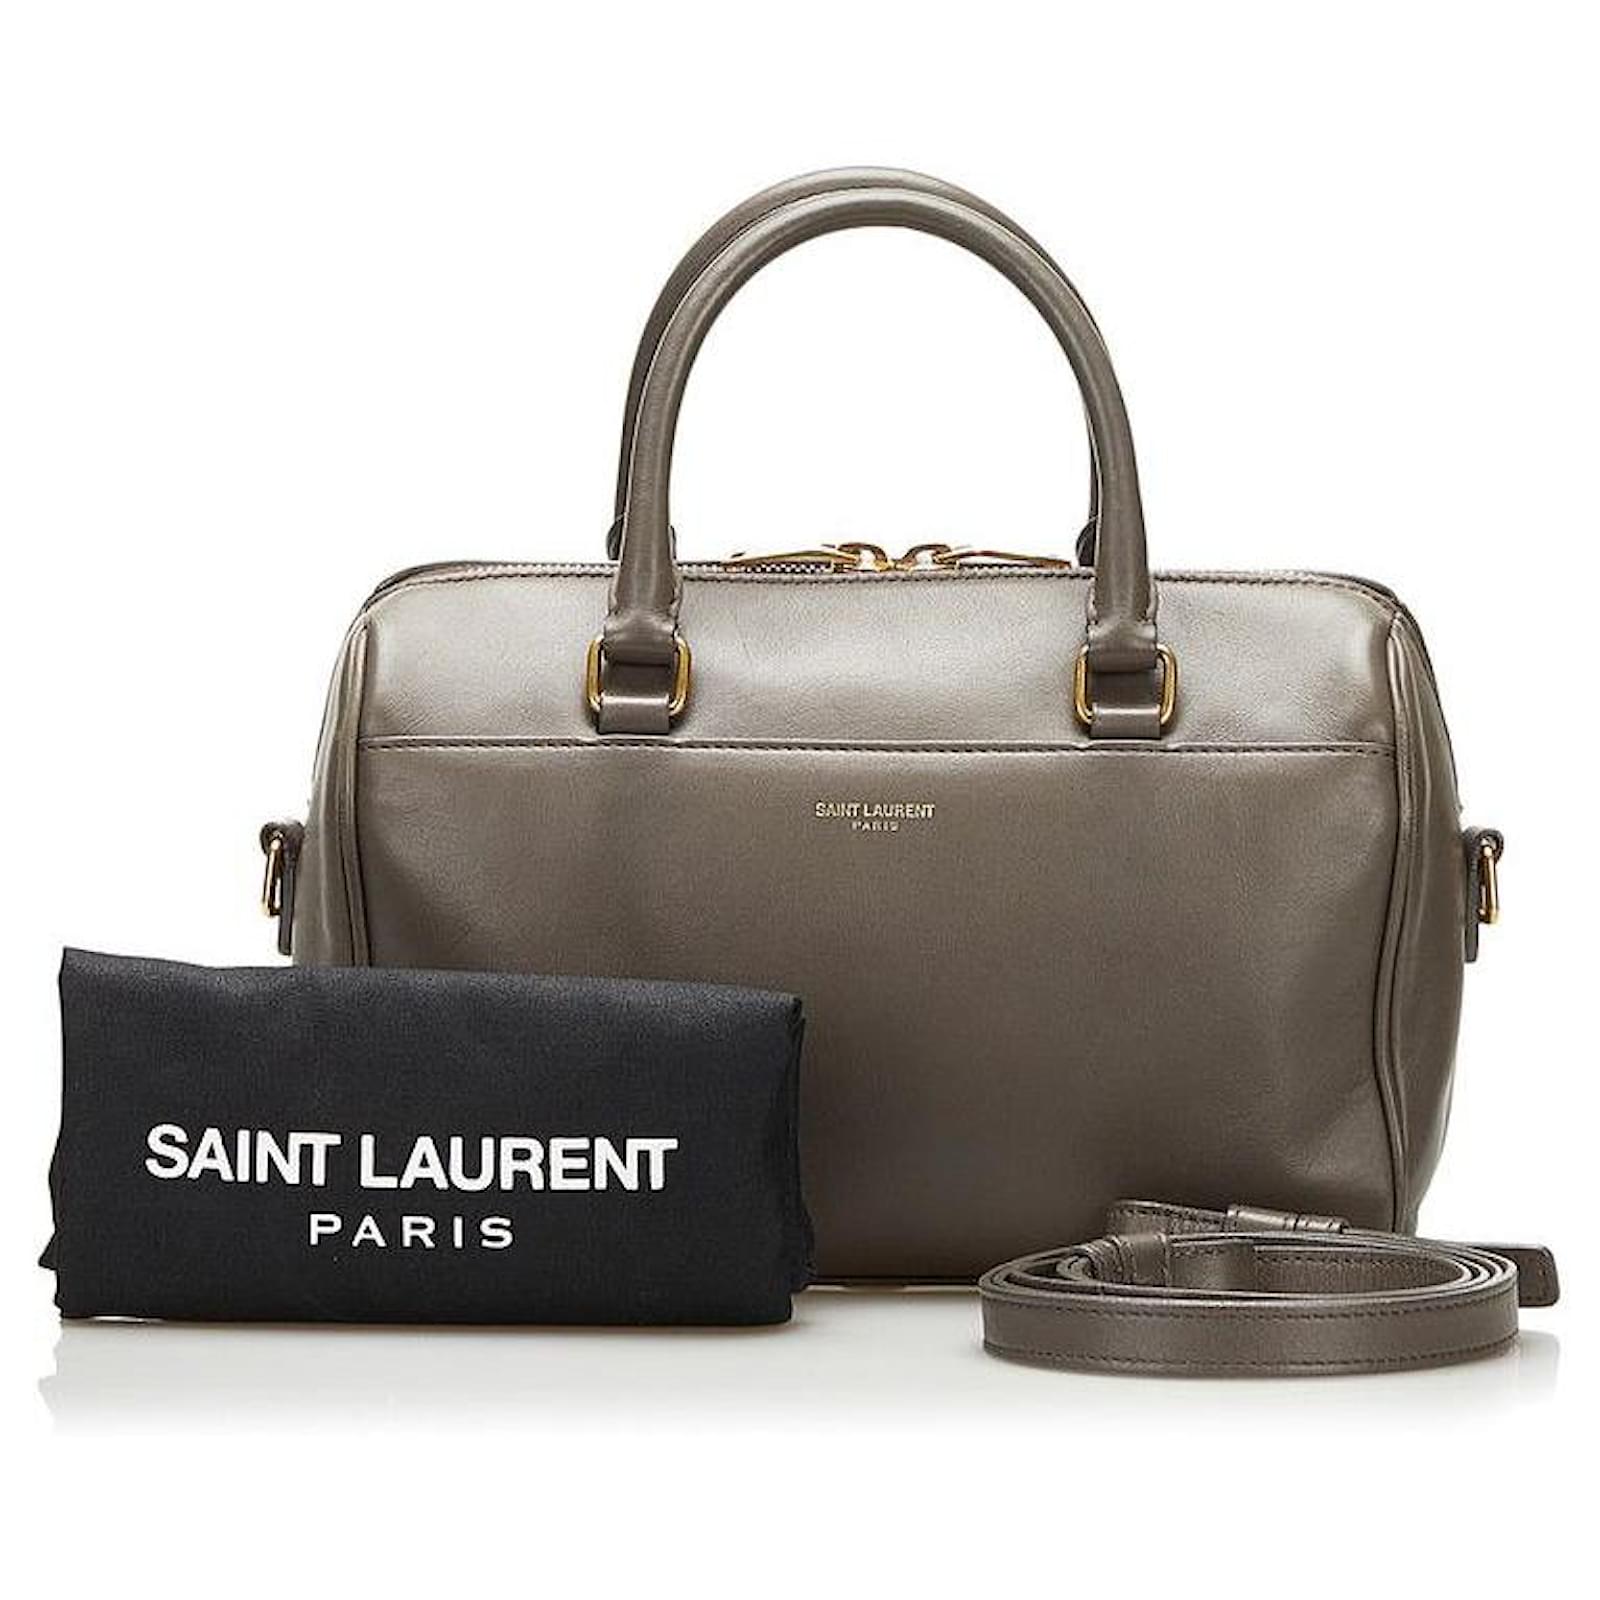 Yves Saint Laurent, Bags, Ysl Classic Duffle 6 Leather Bag Good Condition